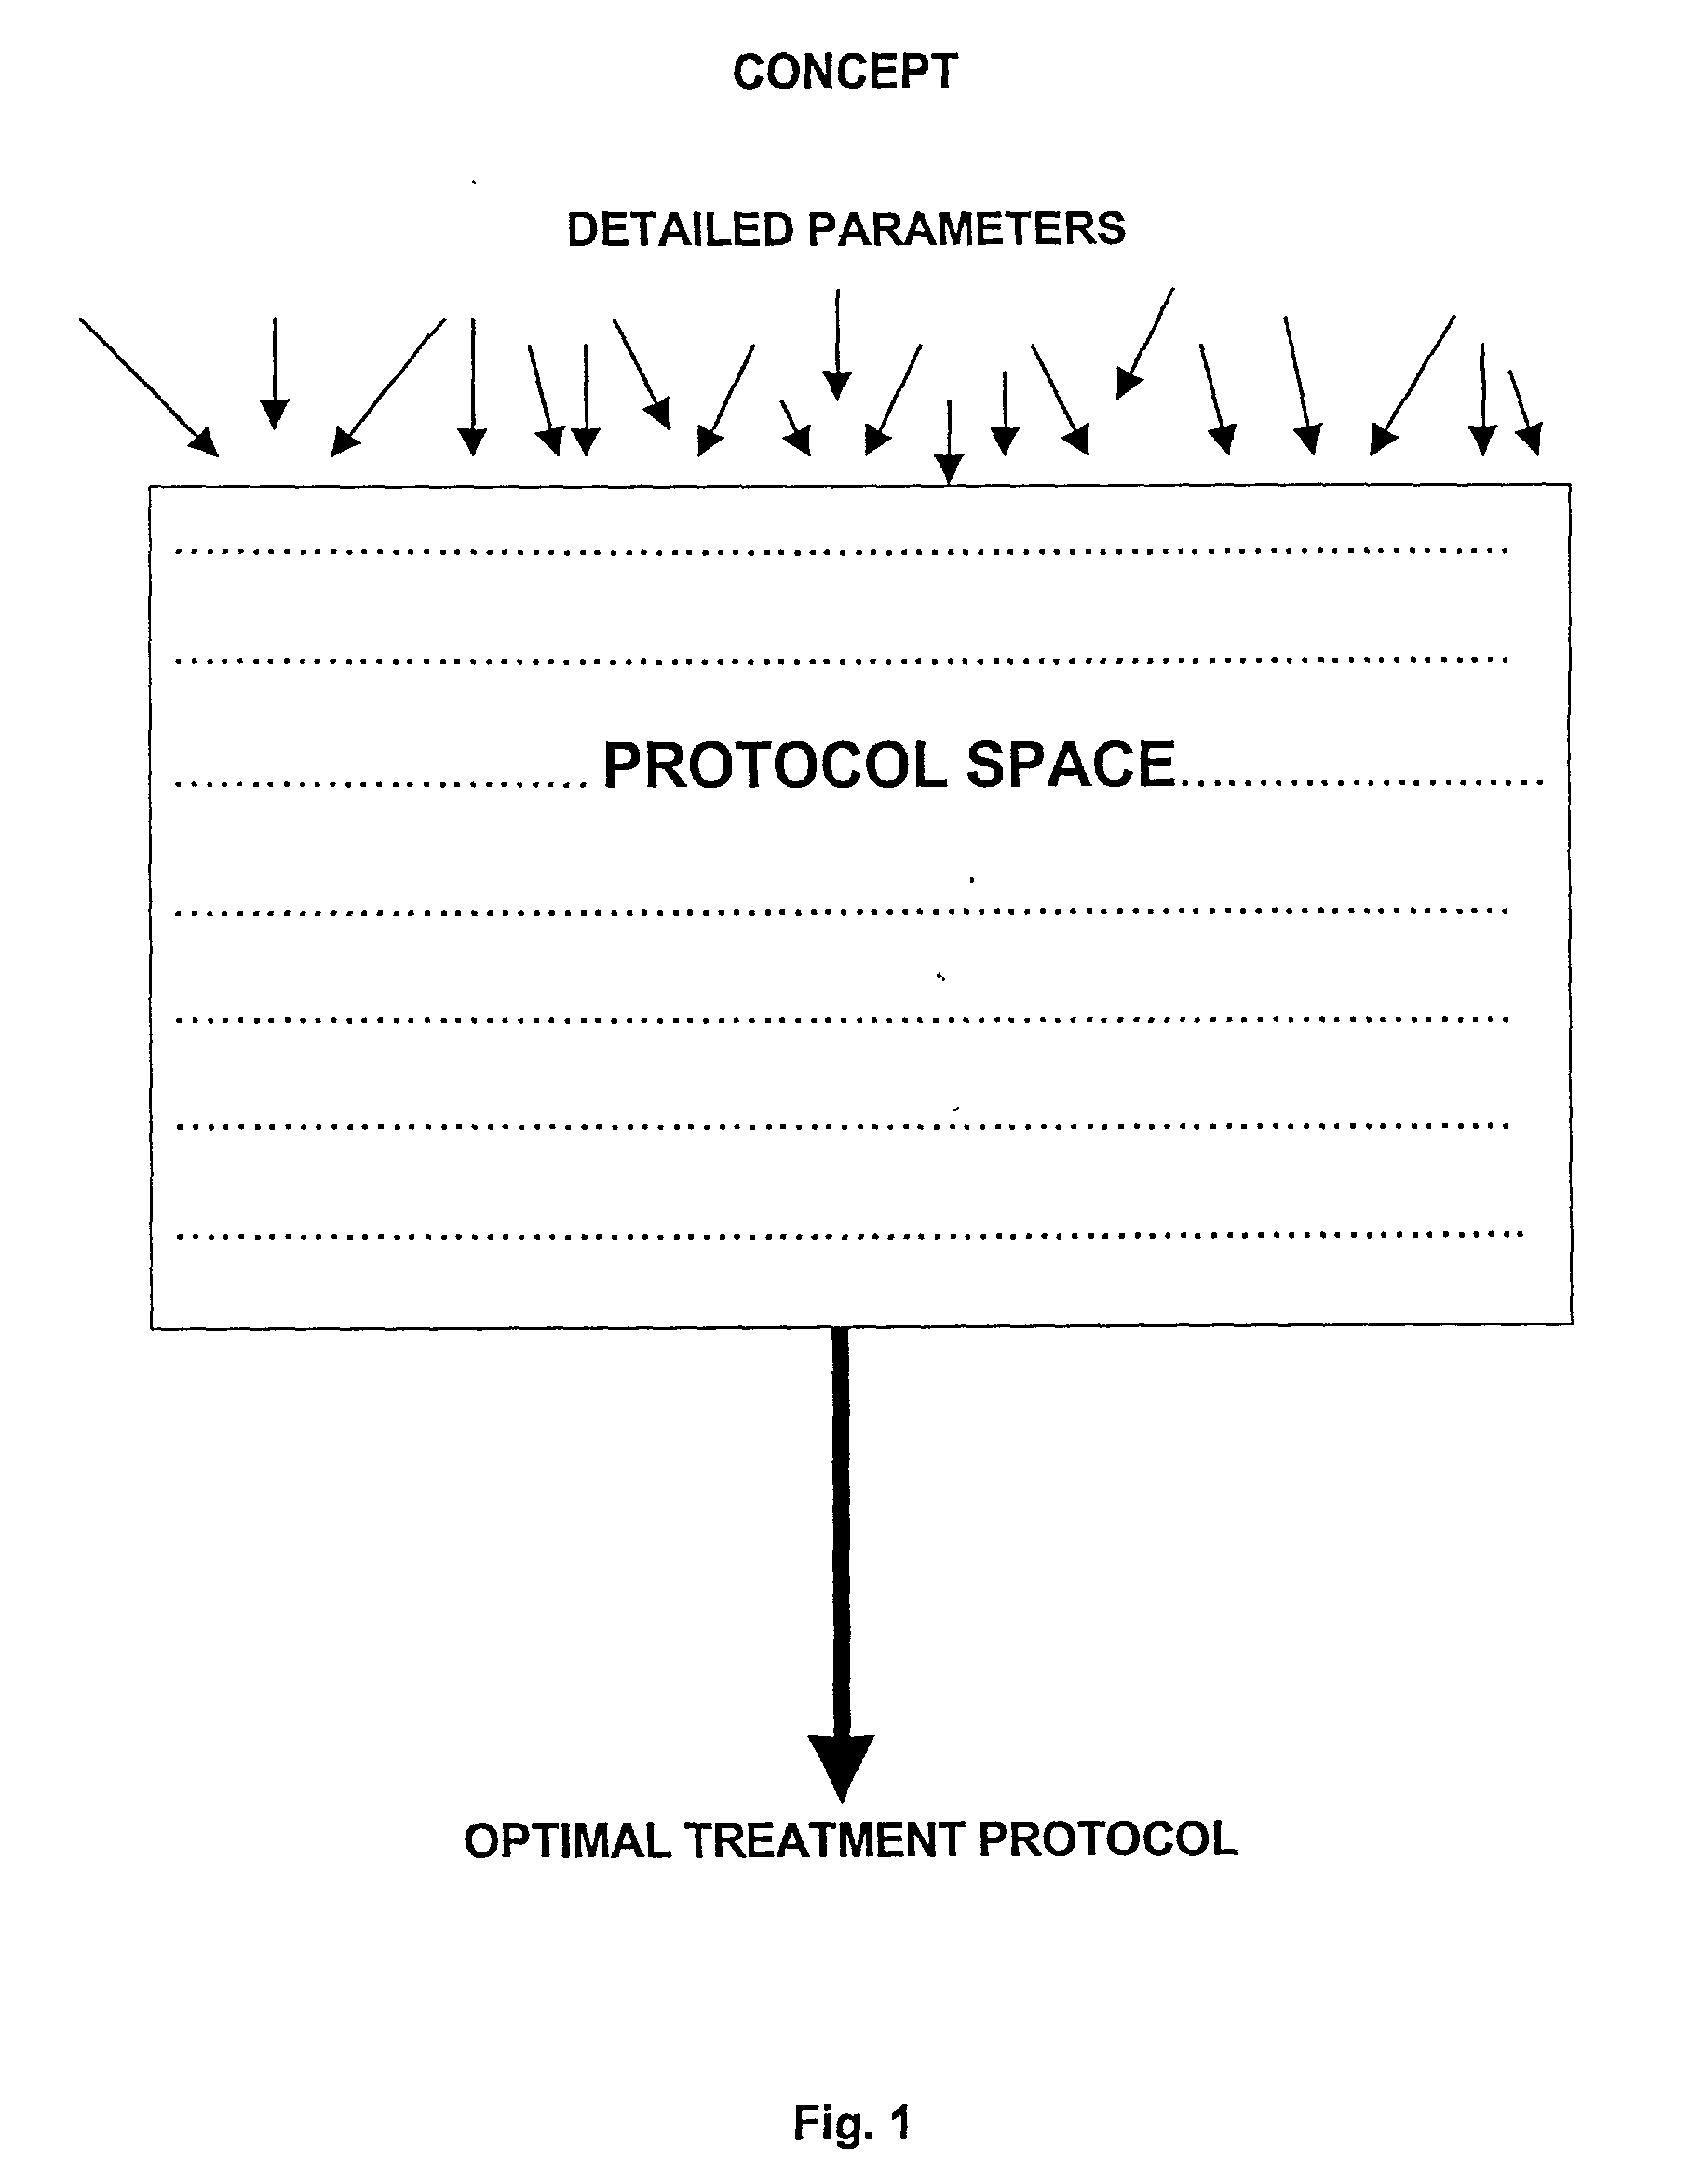 System and methods for optimized drug delivery and progression of diseased and normal cells